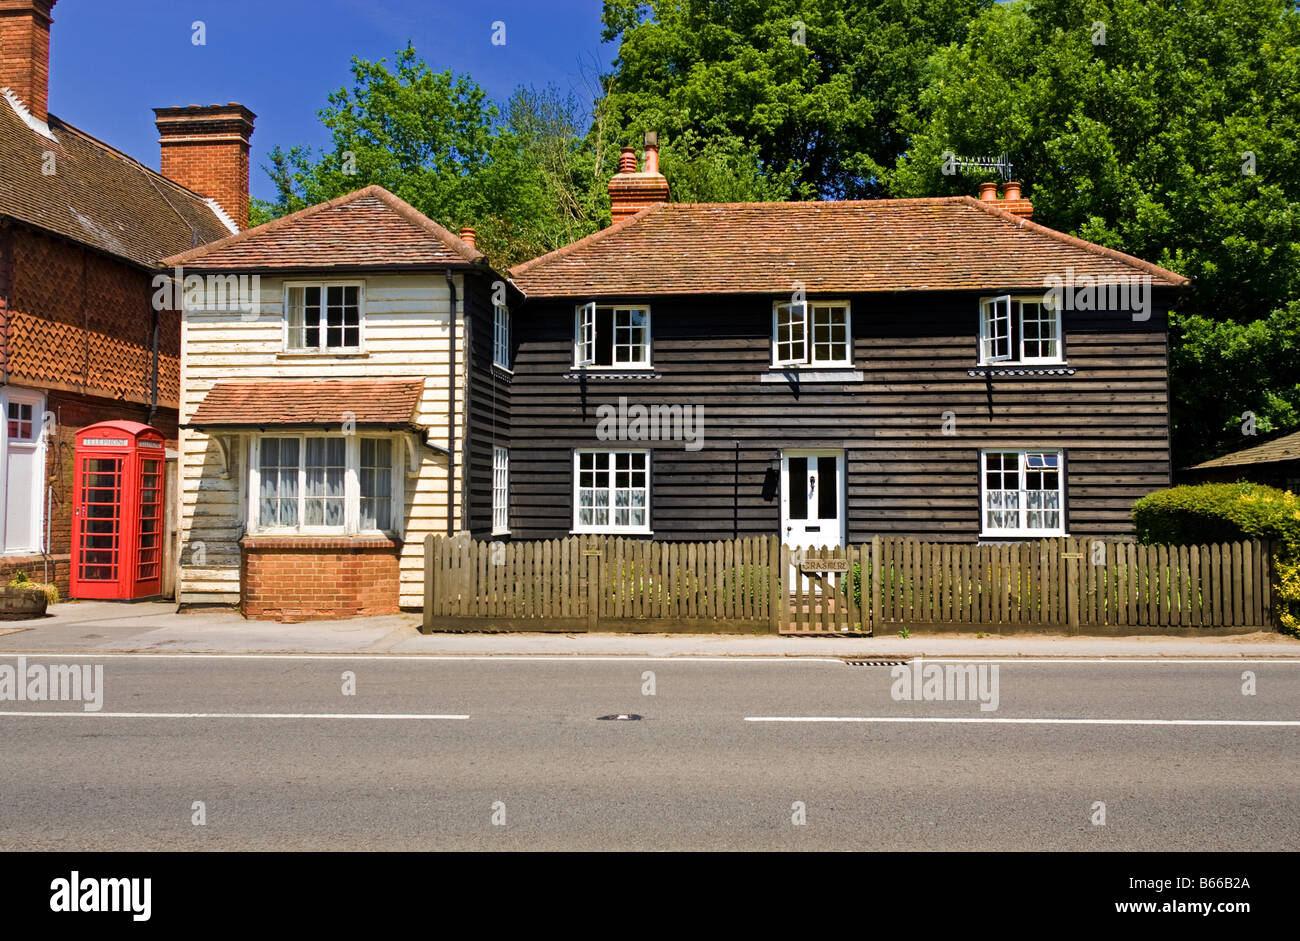 Surrey UK - houses in the village of Abinger Hammer Stock Photo